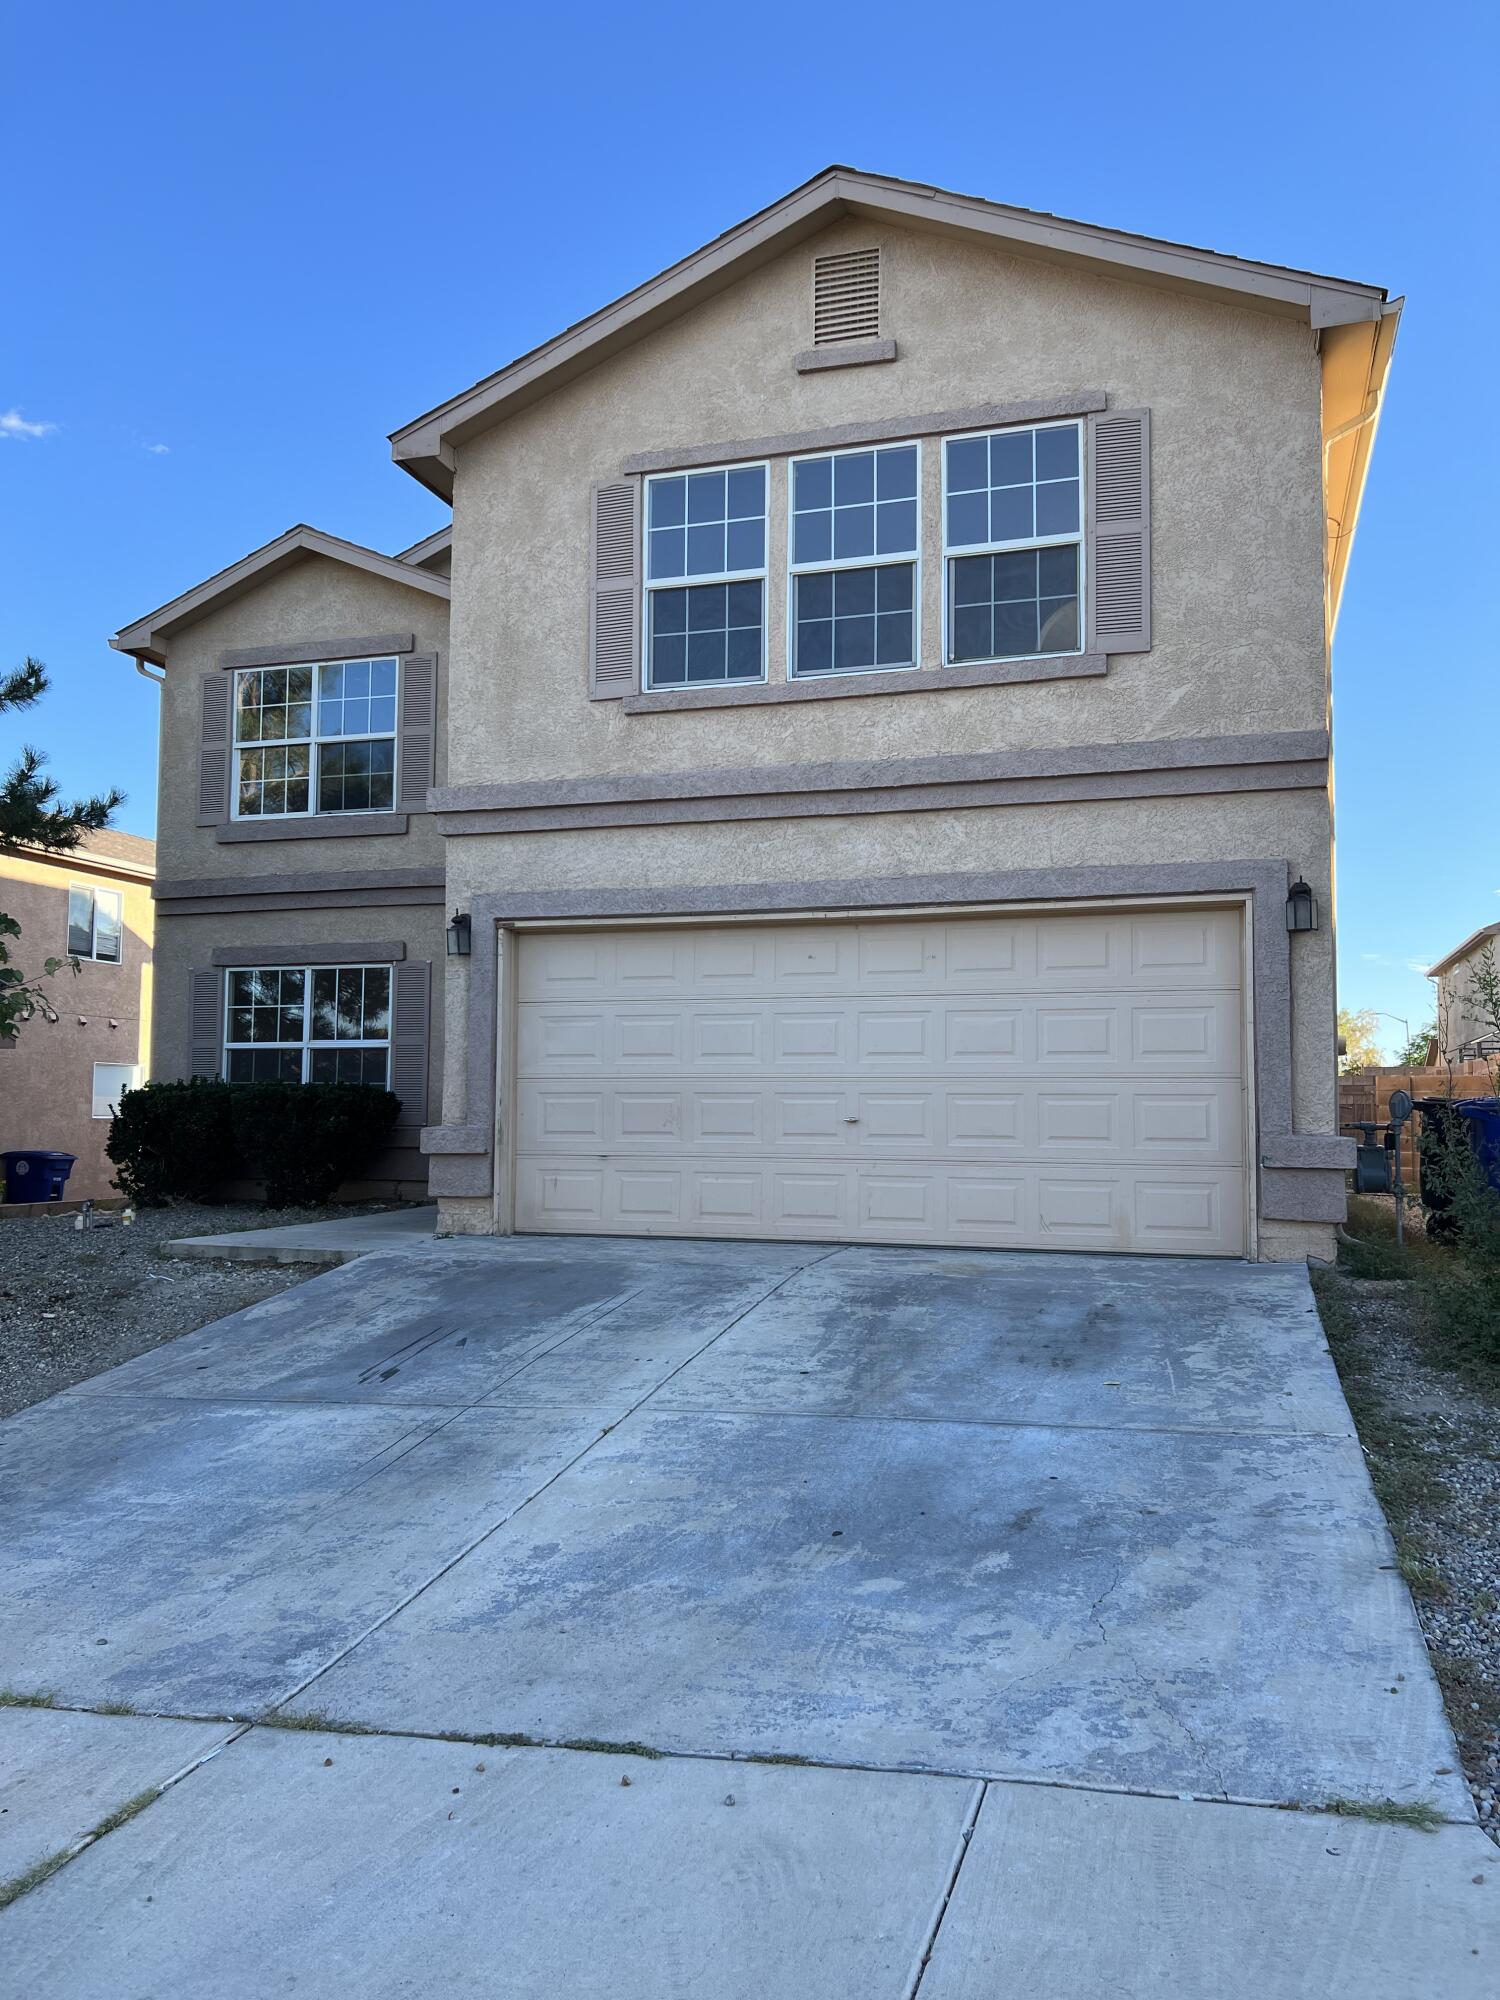 HOME SOLD AS IS.4 bedroom, 2.5 bath built by DR Horton. Located in the Sungate Gated Community in Southwest Albuquerque. Featuring open floorplan, 2 living space and close to shopping, highways, and restaurants. Home needs work. Has 1 new A/C Unit.